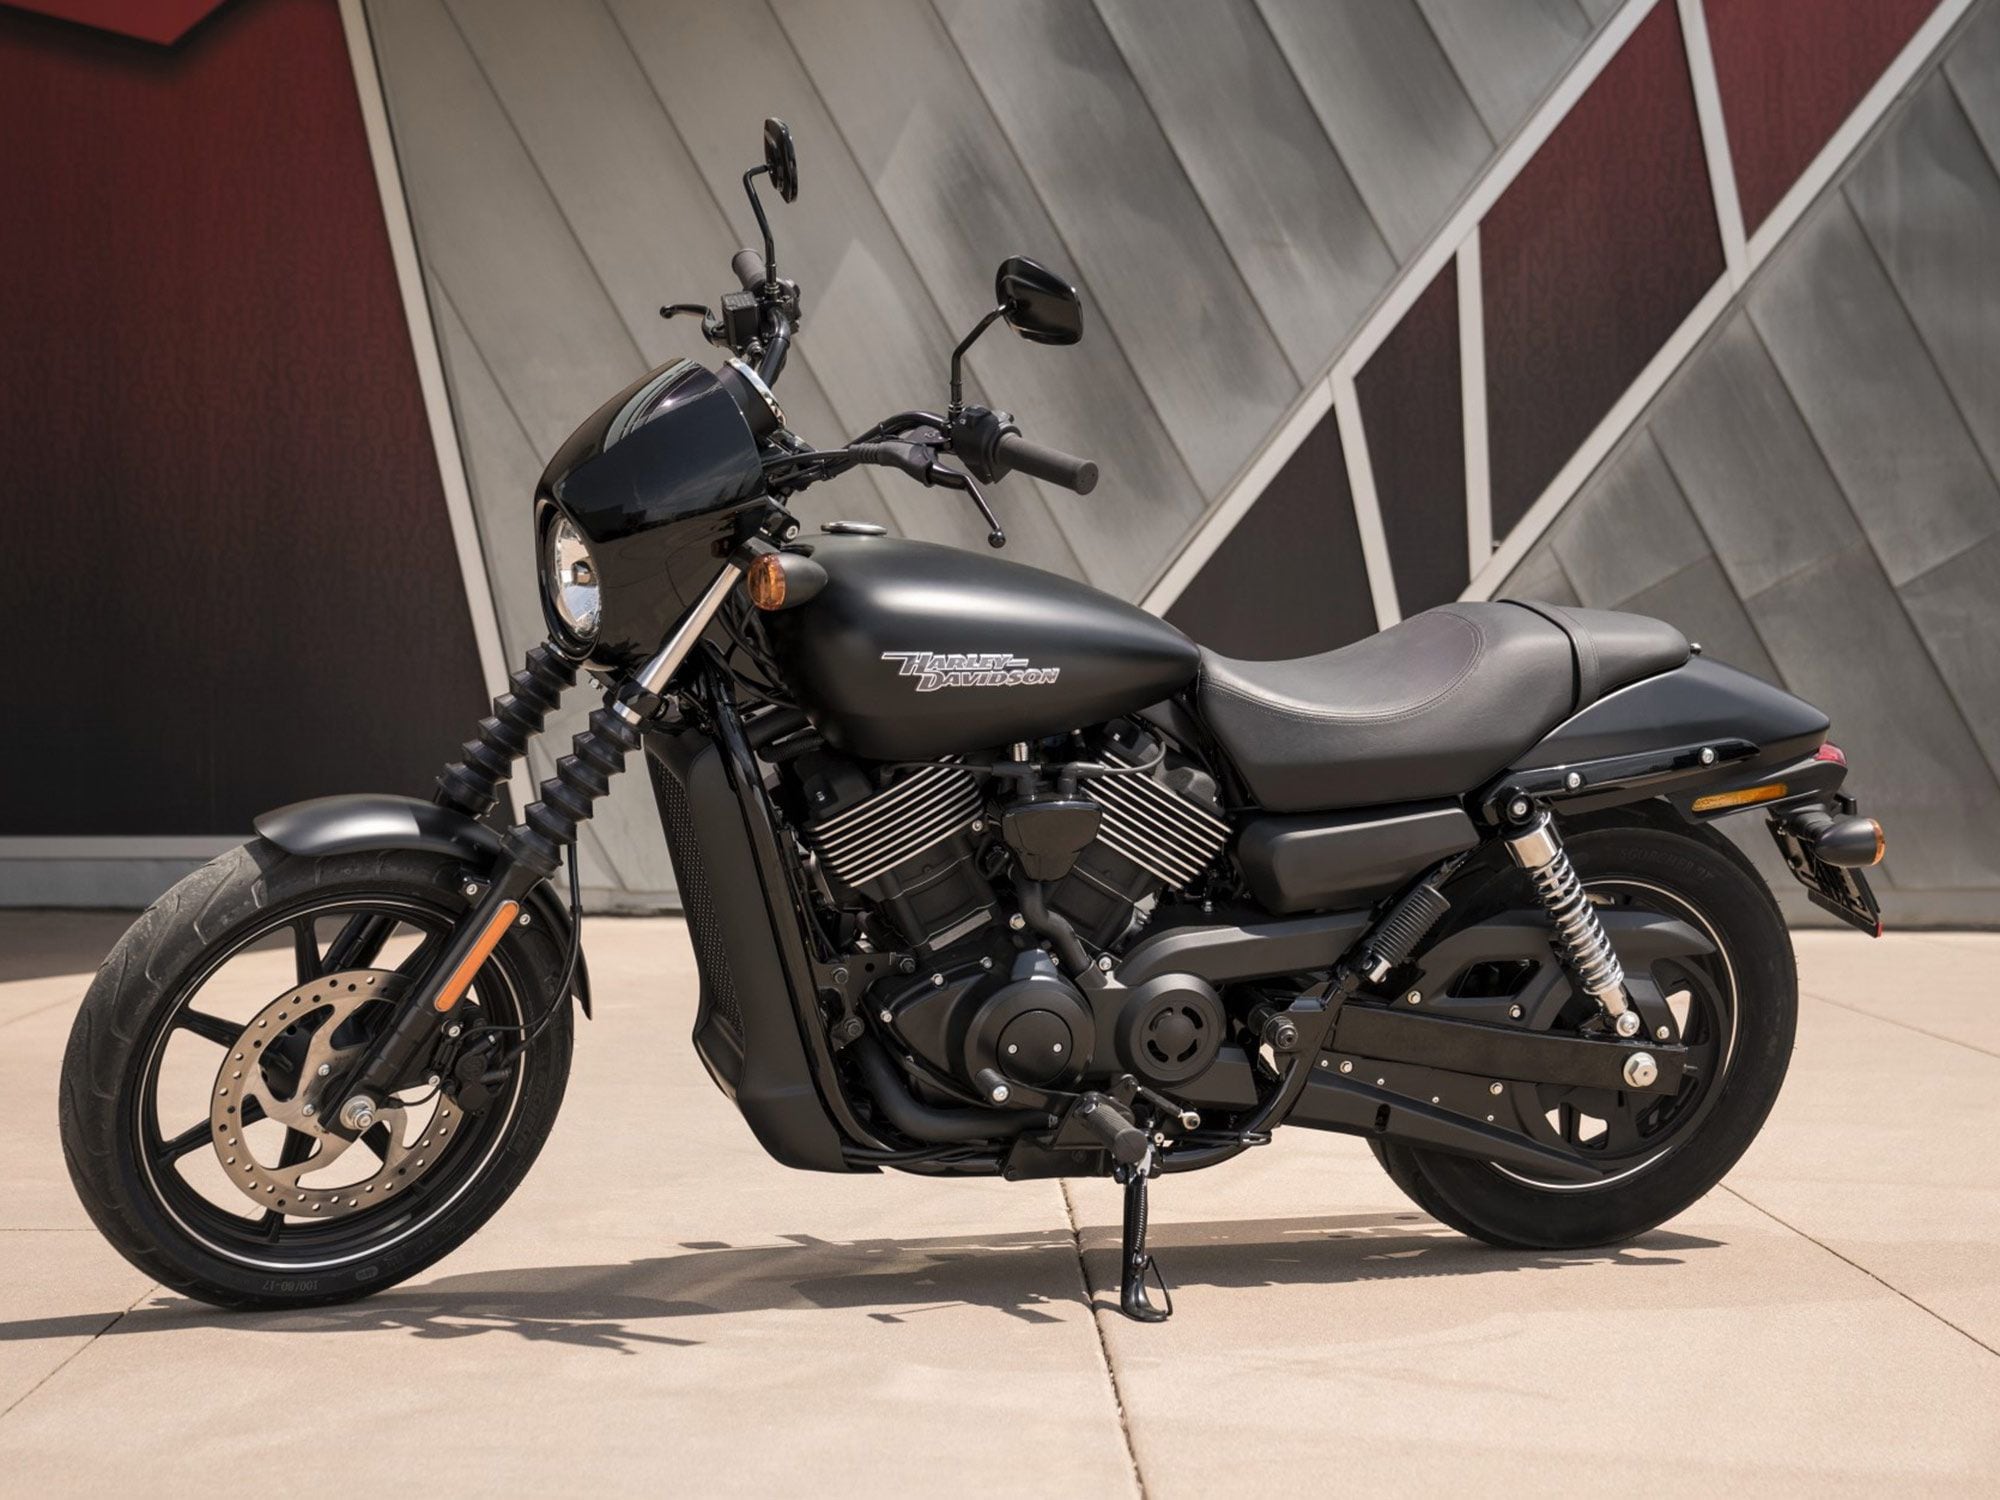 Harley’s current big seller in India is the Street 750.